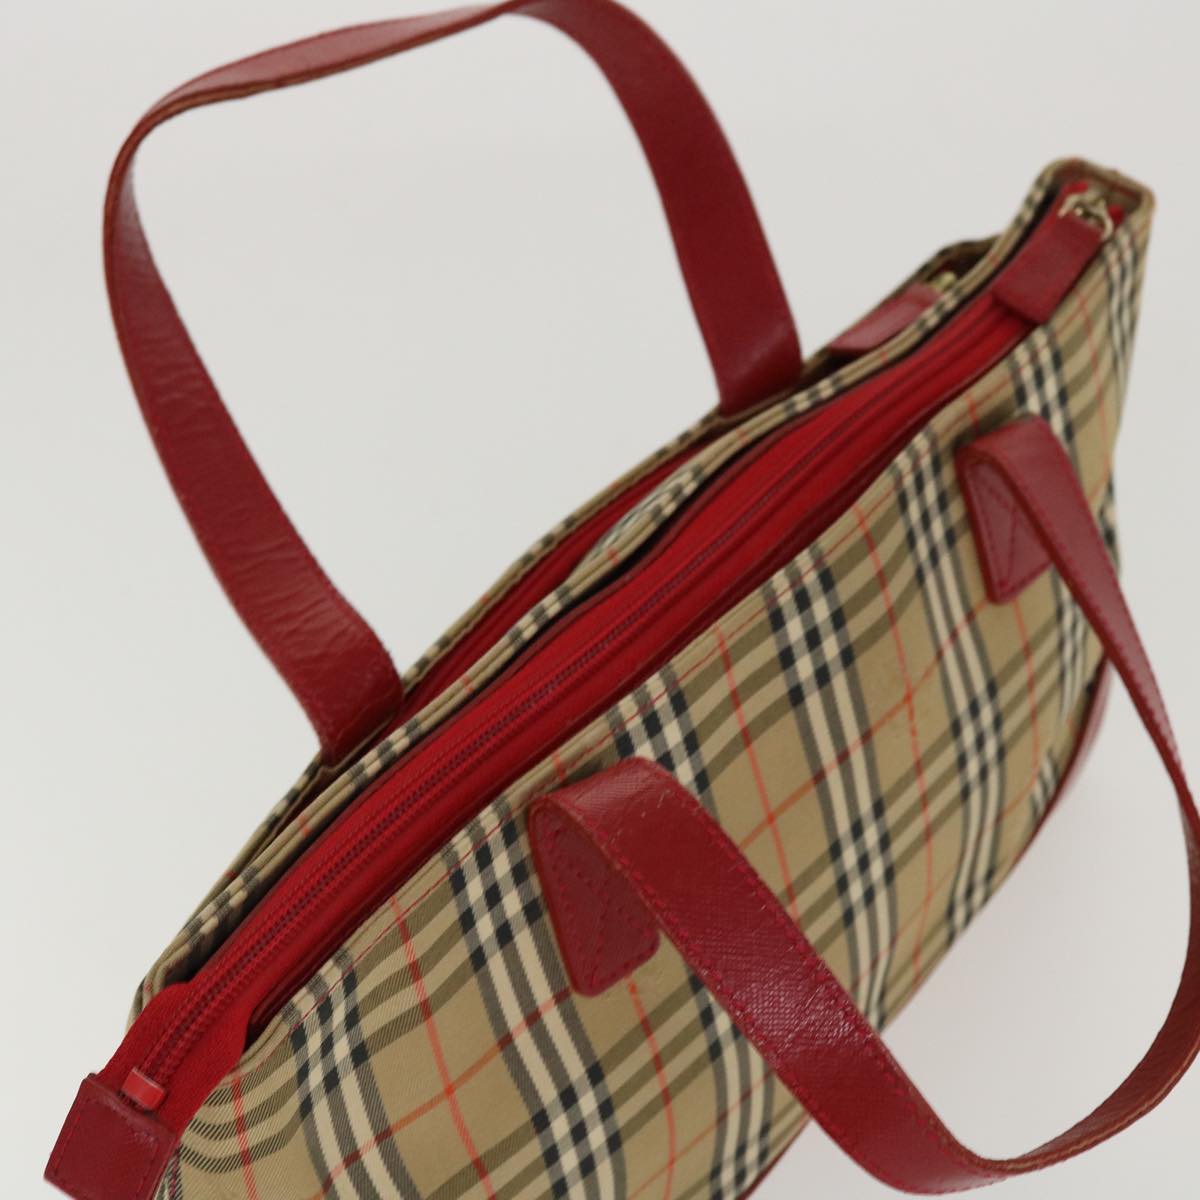 Burberrys Hand Bag Nylon Leather Beige Red Auth bs4630